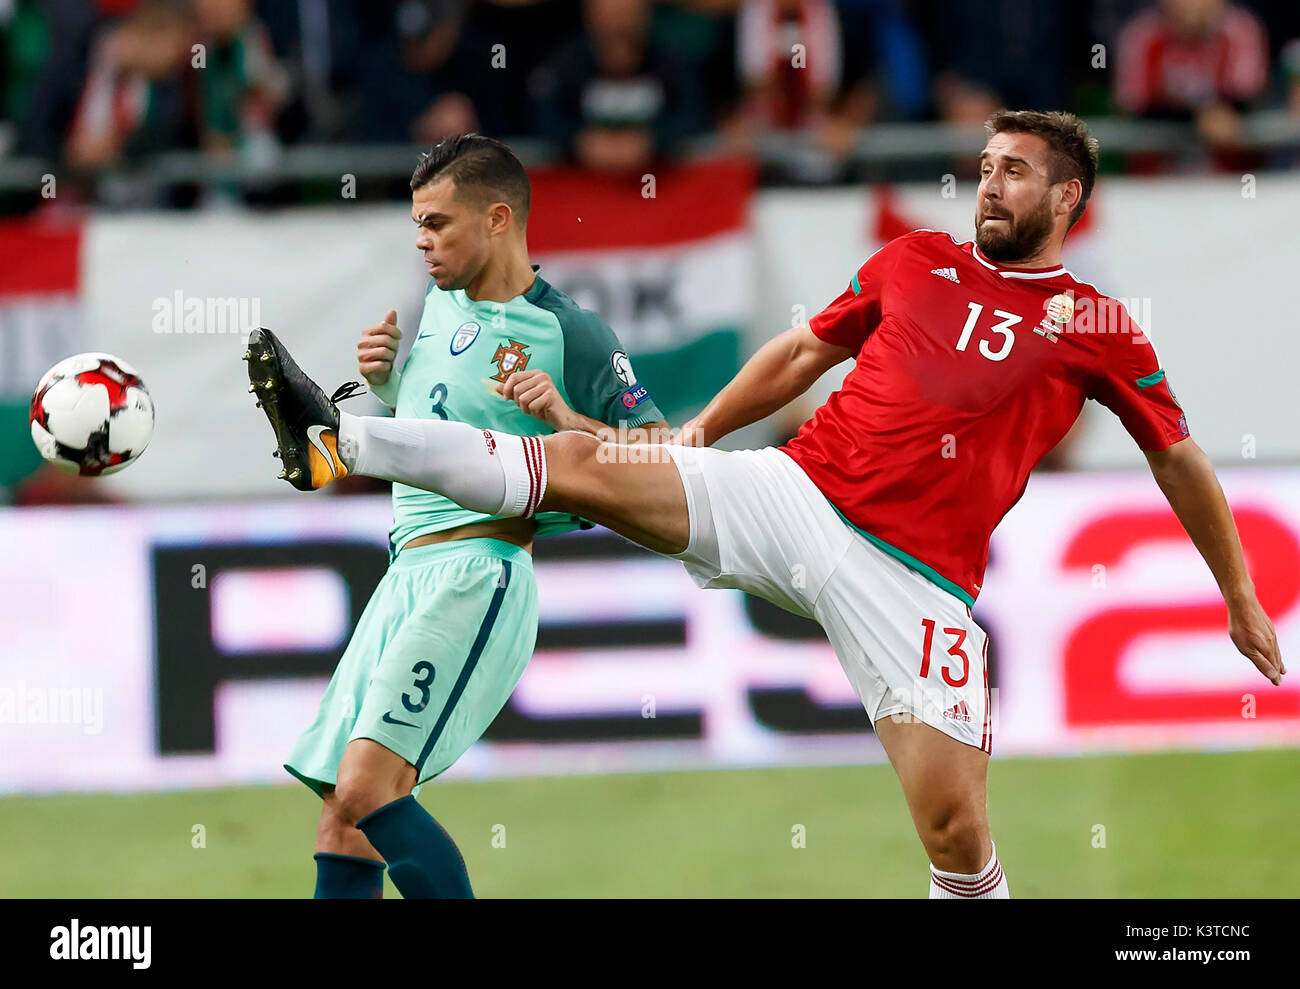 Budapest, Hungary. 03rd Sep, 2017. BUDAPEST, HUNGARY - SEPTEMBER 3: Daniel Bode #13 of Hungary fights for the ball with Pepe #3 of Portugal during the FIFA 2018 World Cup Qualifier match between Hungary and Portugal at Groupama Arena on September 3, 2017 in Budapest, Hungary. Credit: Laszlo Szirtesi/Alamy Live News Stock Photo